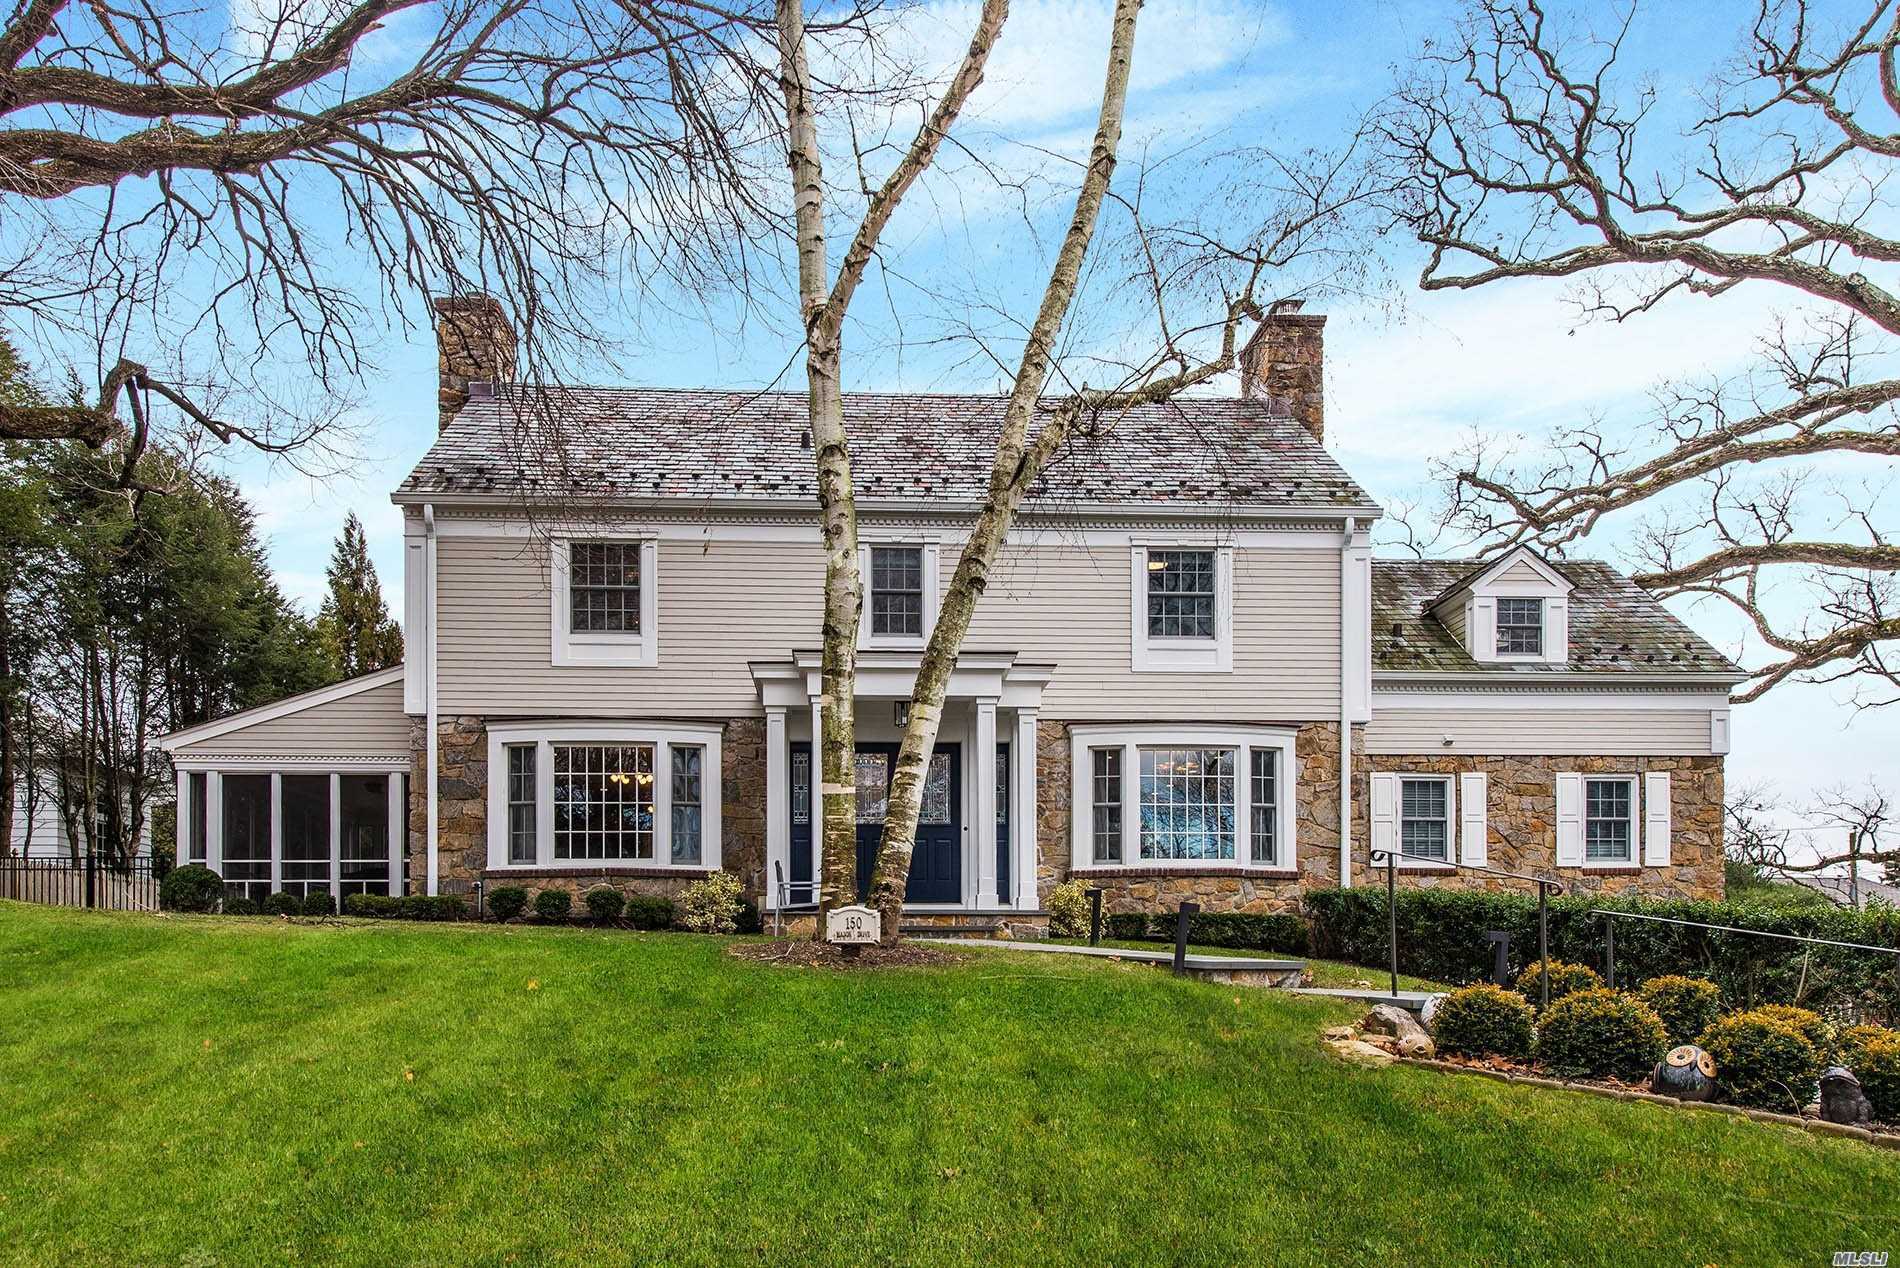 Beautiful Flower Hill Colonial Set On Large .37 Acre. Stunning Renovation Completed In 2017 With Every Attention To Detail And No Expense Spared. The Sleek Design Is Complimented By A Modern Open Floor Plan And Incredible Chef&rsquo;s Kitchen W/Vaulted Ceiling. 2nd Floor Boasts Large Master Bdrm With Bath And Additional 3 Bdrms. Guest Bdrm With Bath On 1st Floor. Close To Town/Train And Large Usable Property Makes For The Perfect Opportunity In Manhasset.